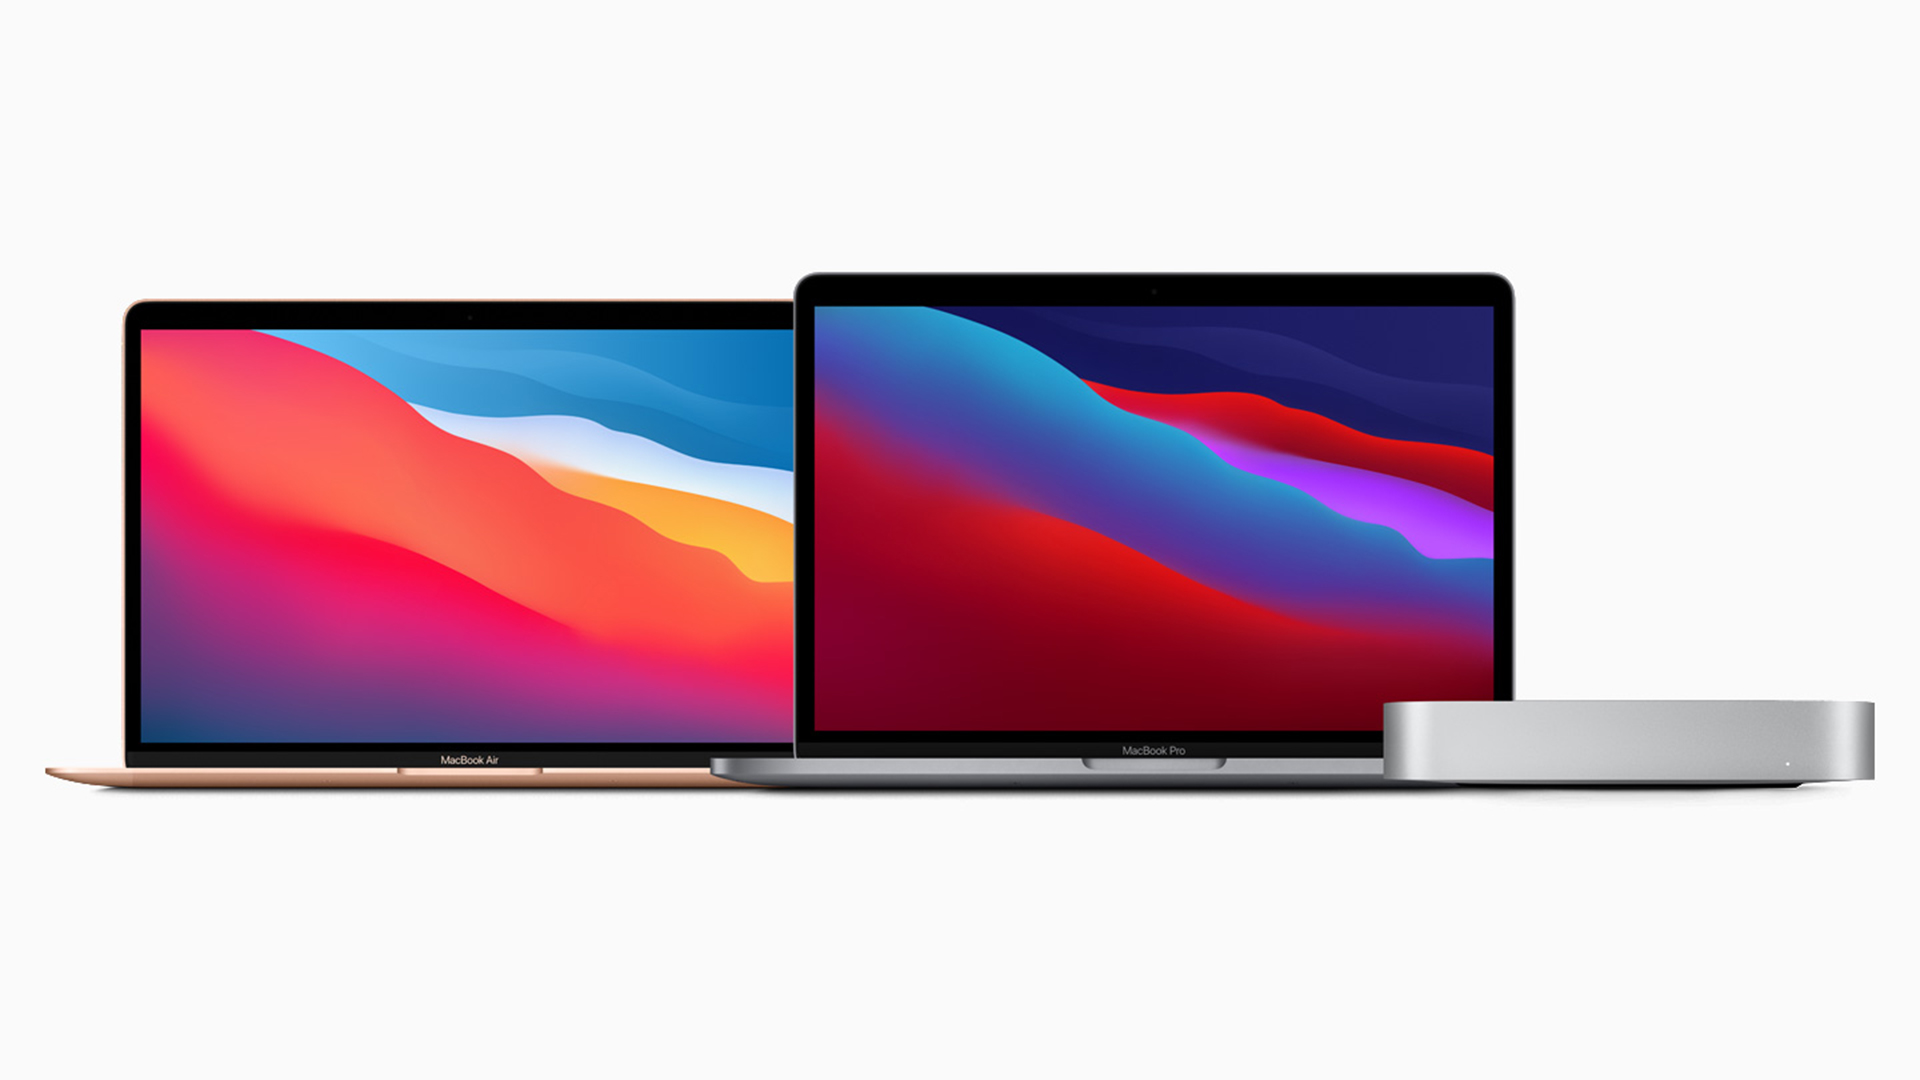 Apple’s New MacBook Air, MacBook Pro 13, Mac Mini With M1 Chip Now Available in India: Price, Specs